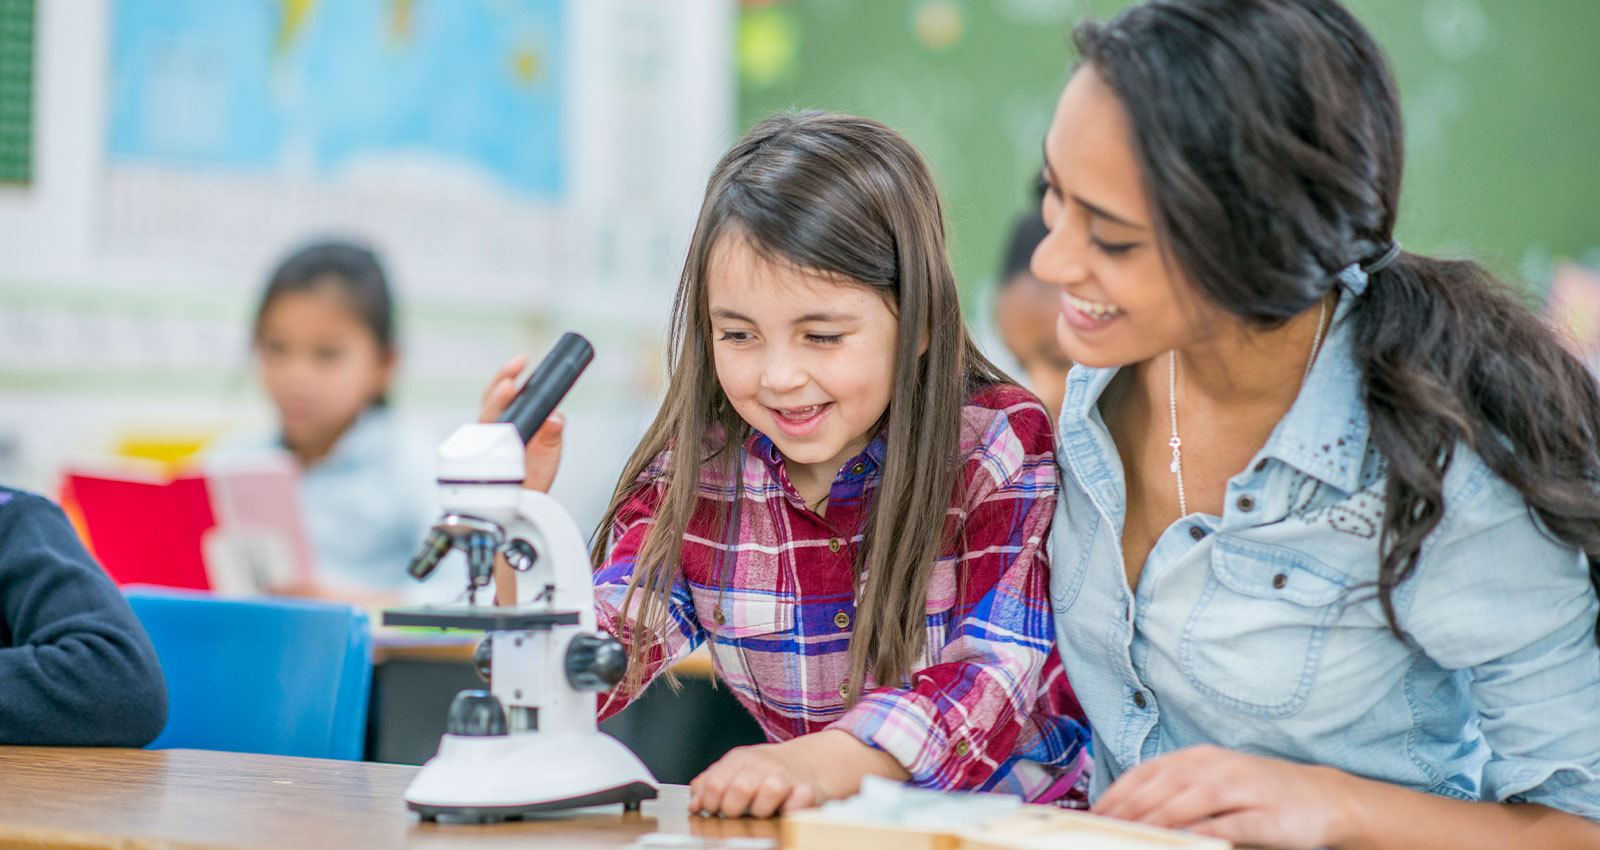 Teacher encourages young female student using a microscope.